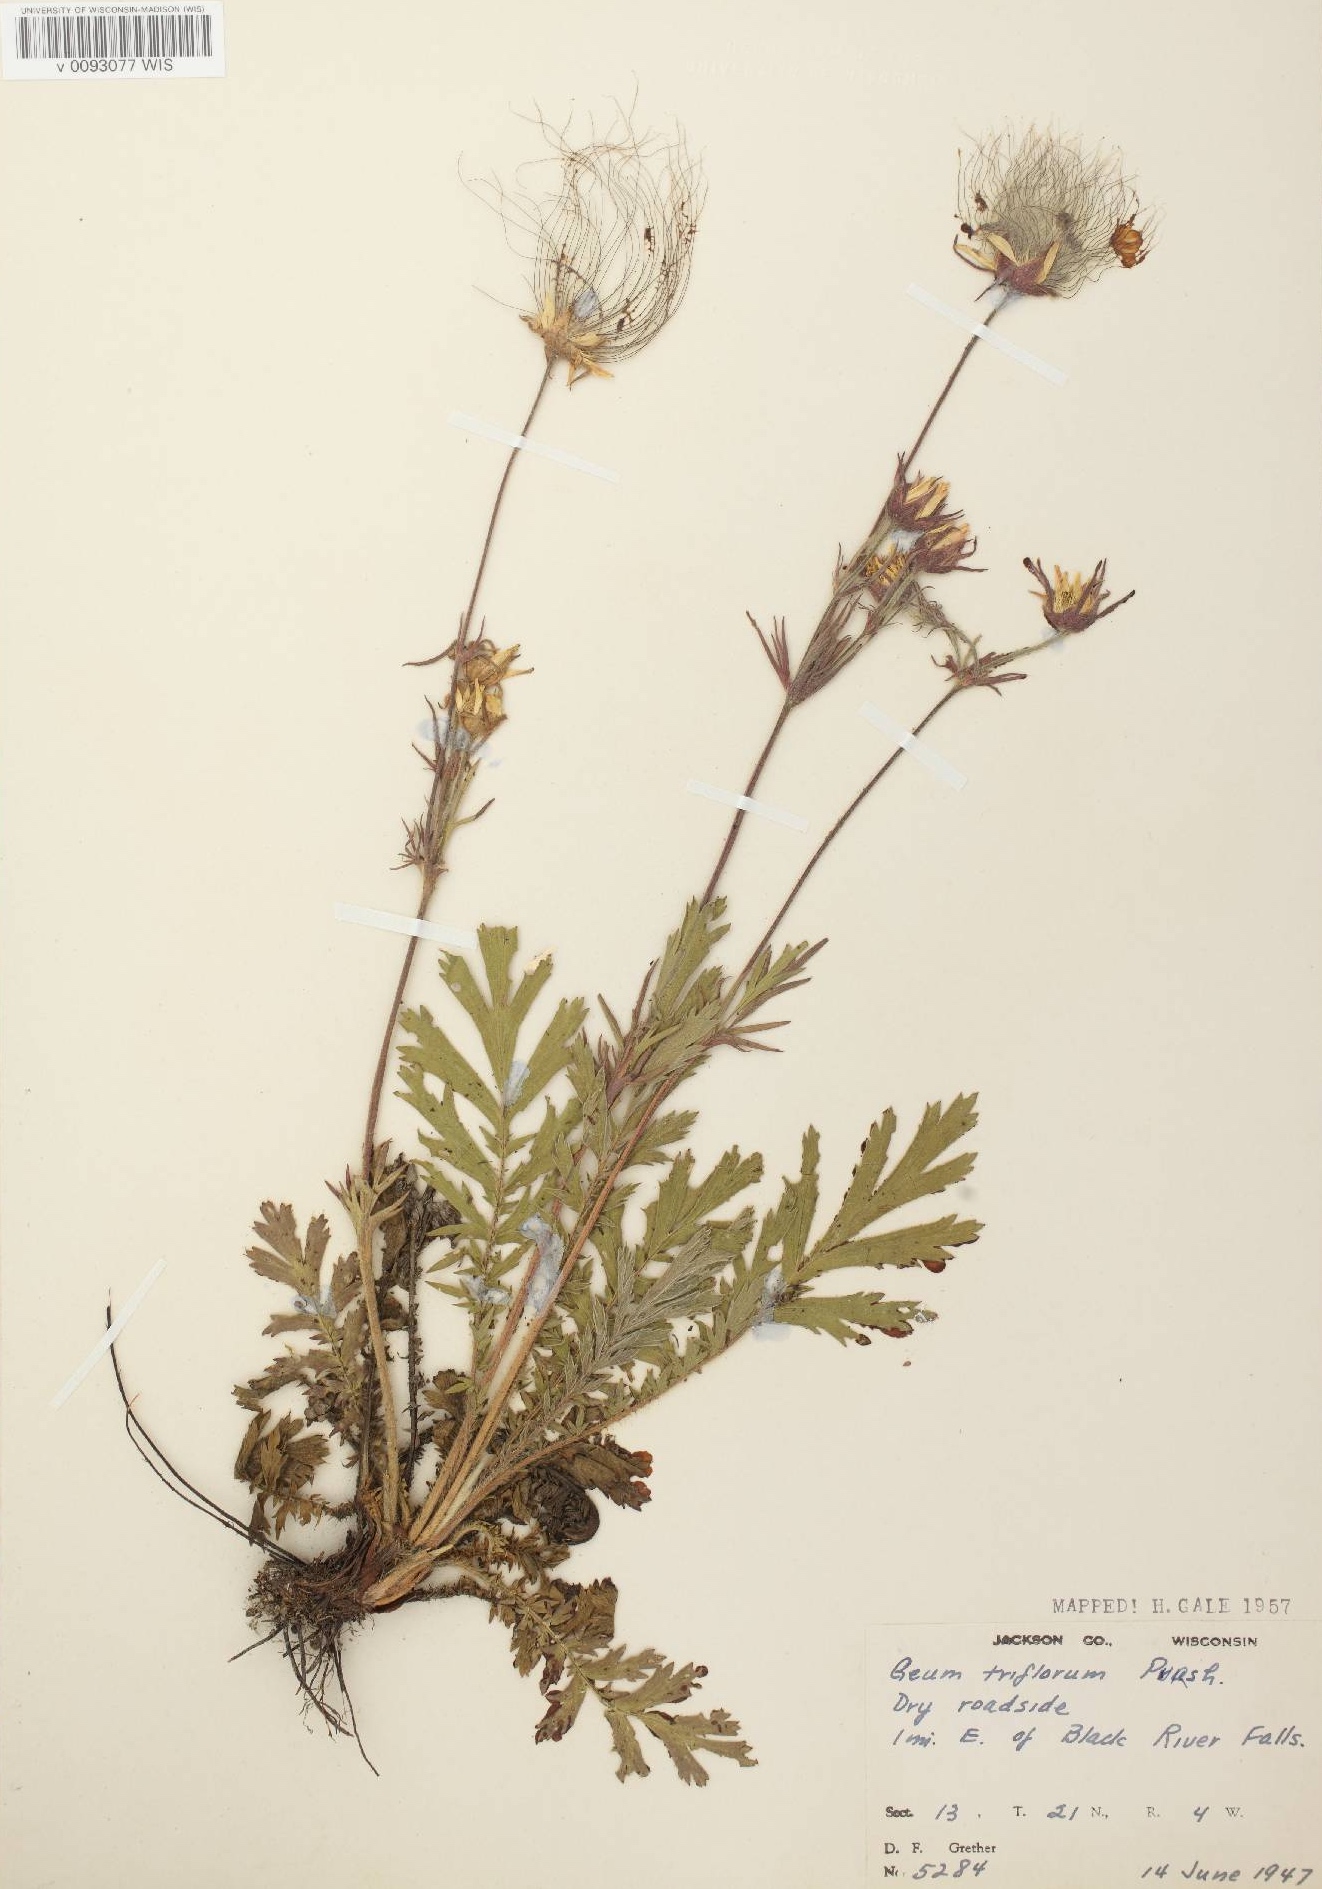 Prairie Smoke specimen collected on June 14, 1947 about a mile east of Black River Falls.